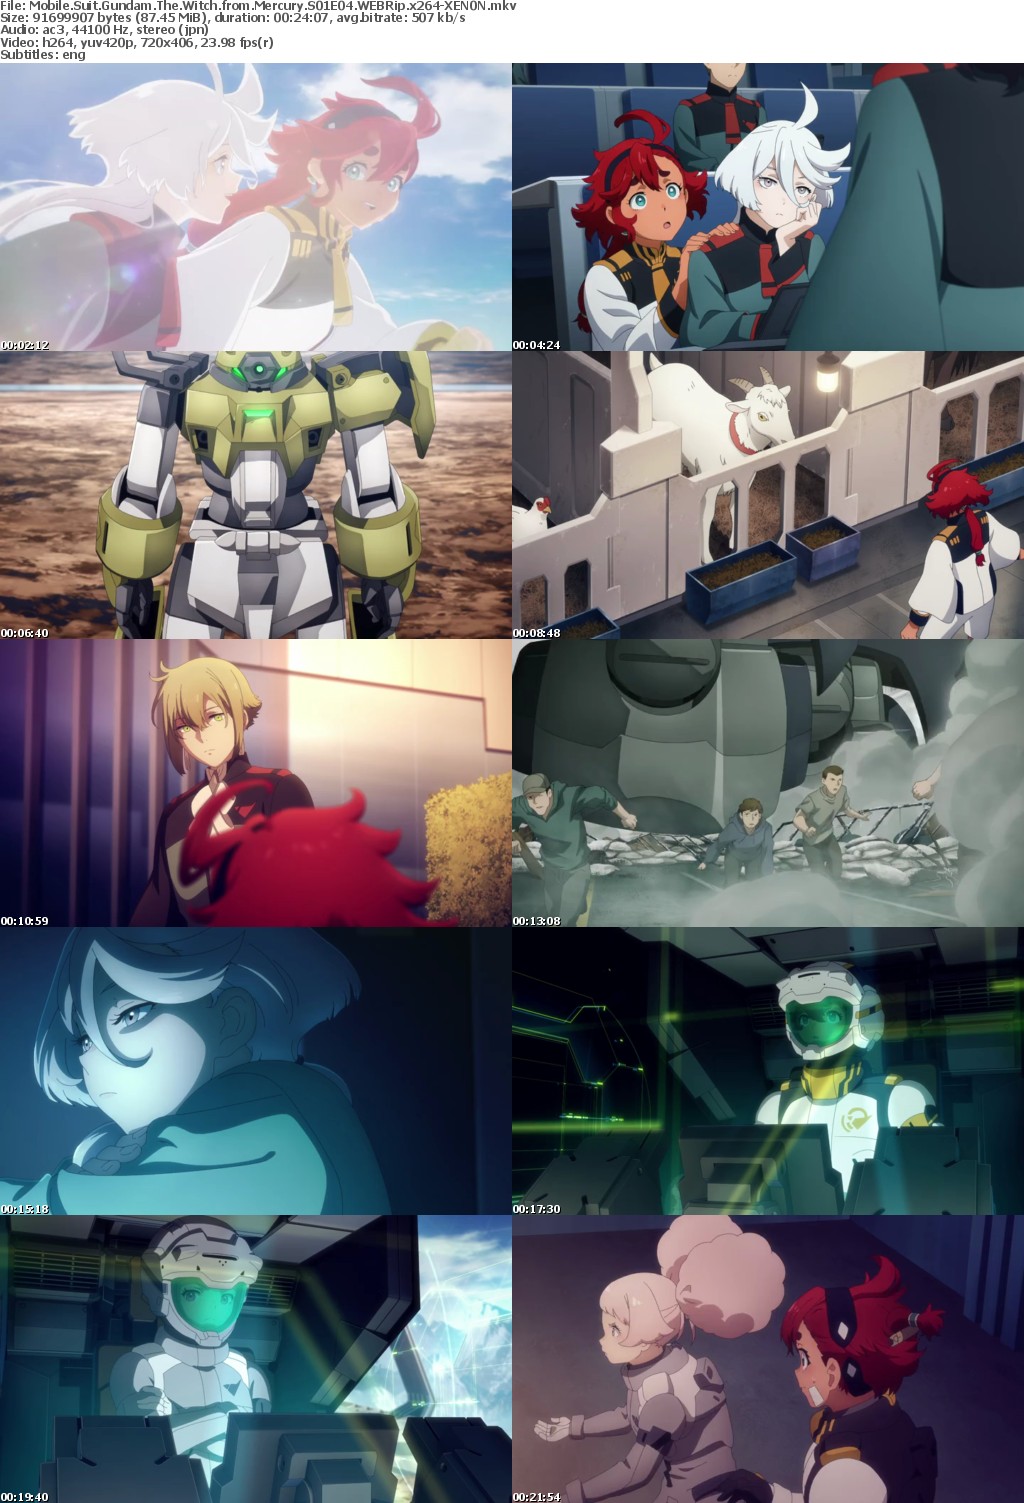 Mobile Suit Gundam The Witch from Mercury S01E04 WEBRip x264-XEN0N